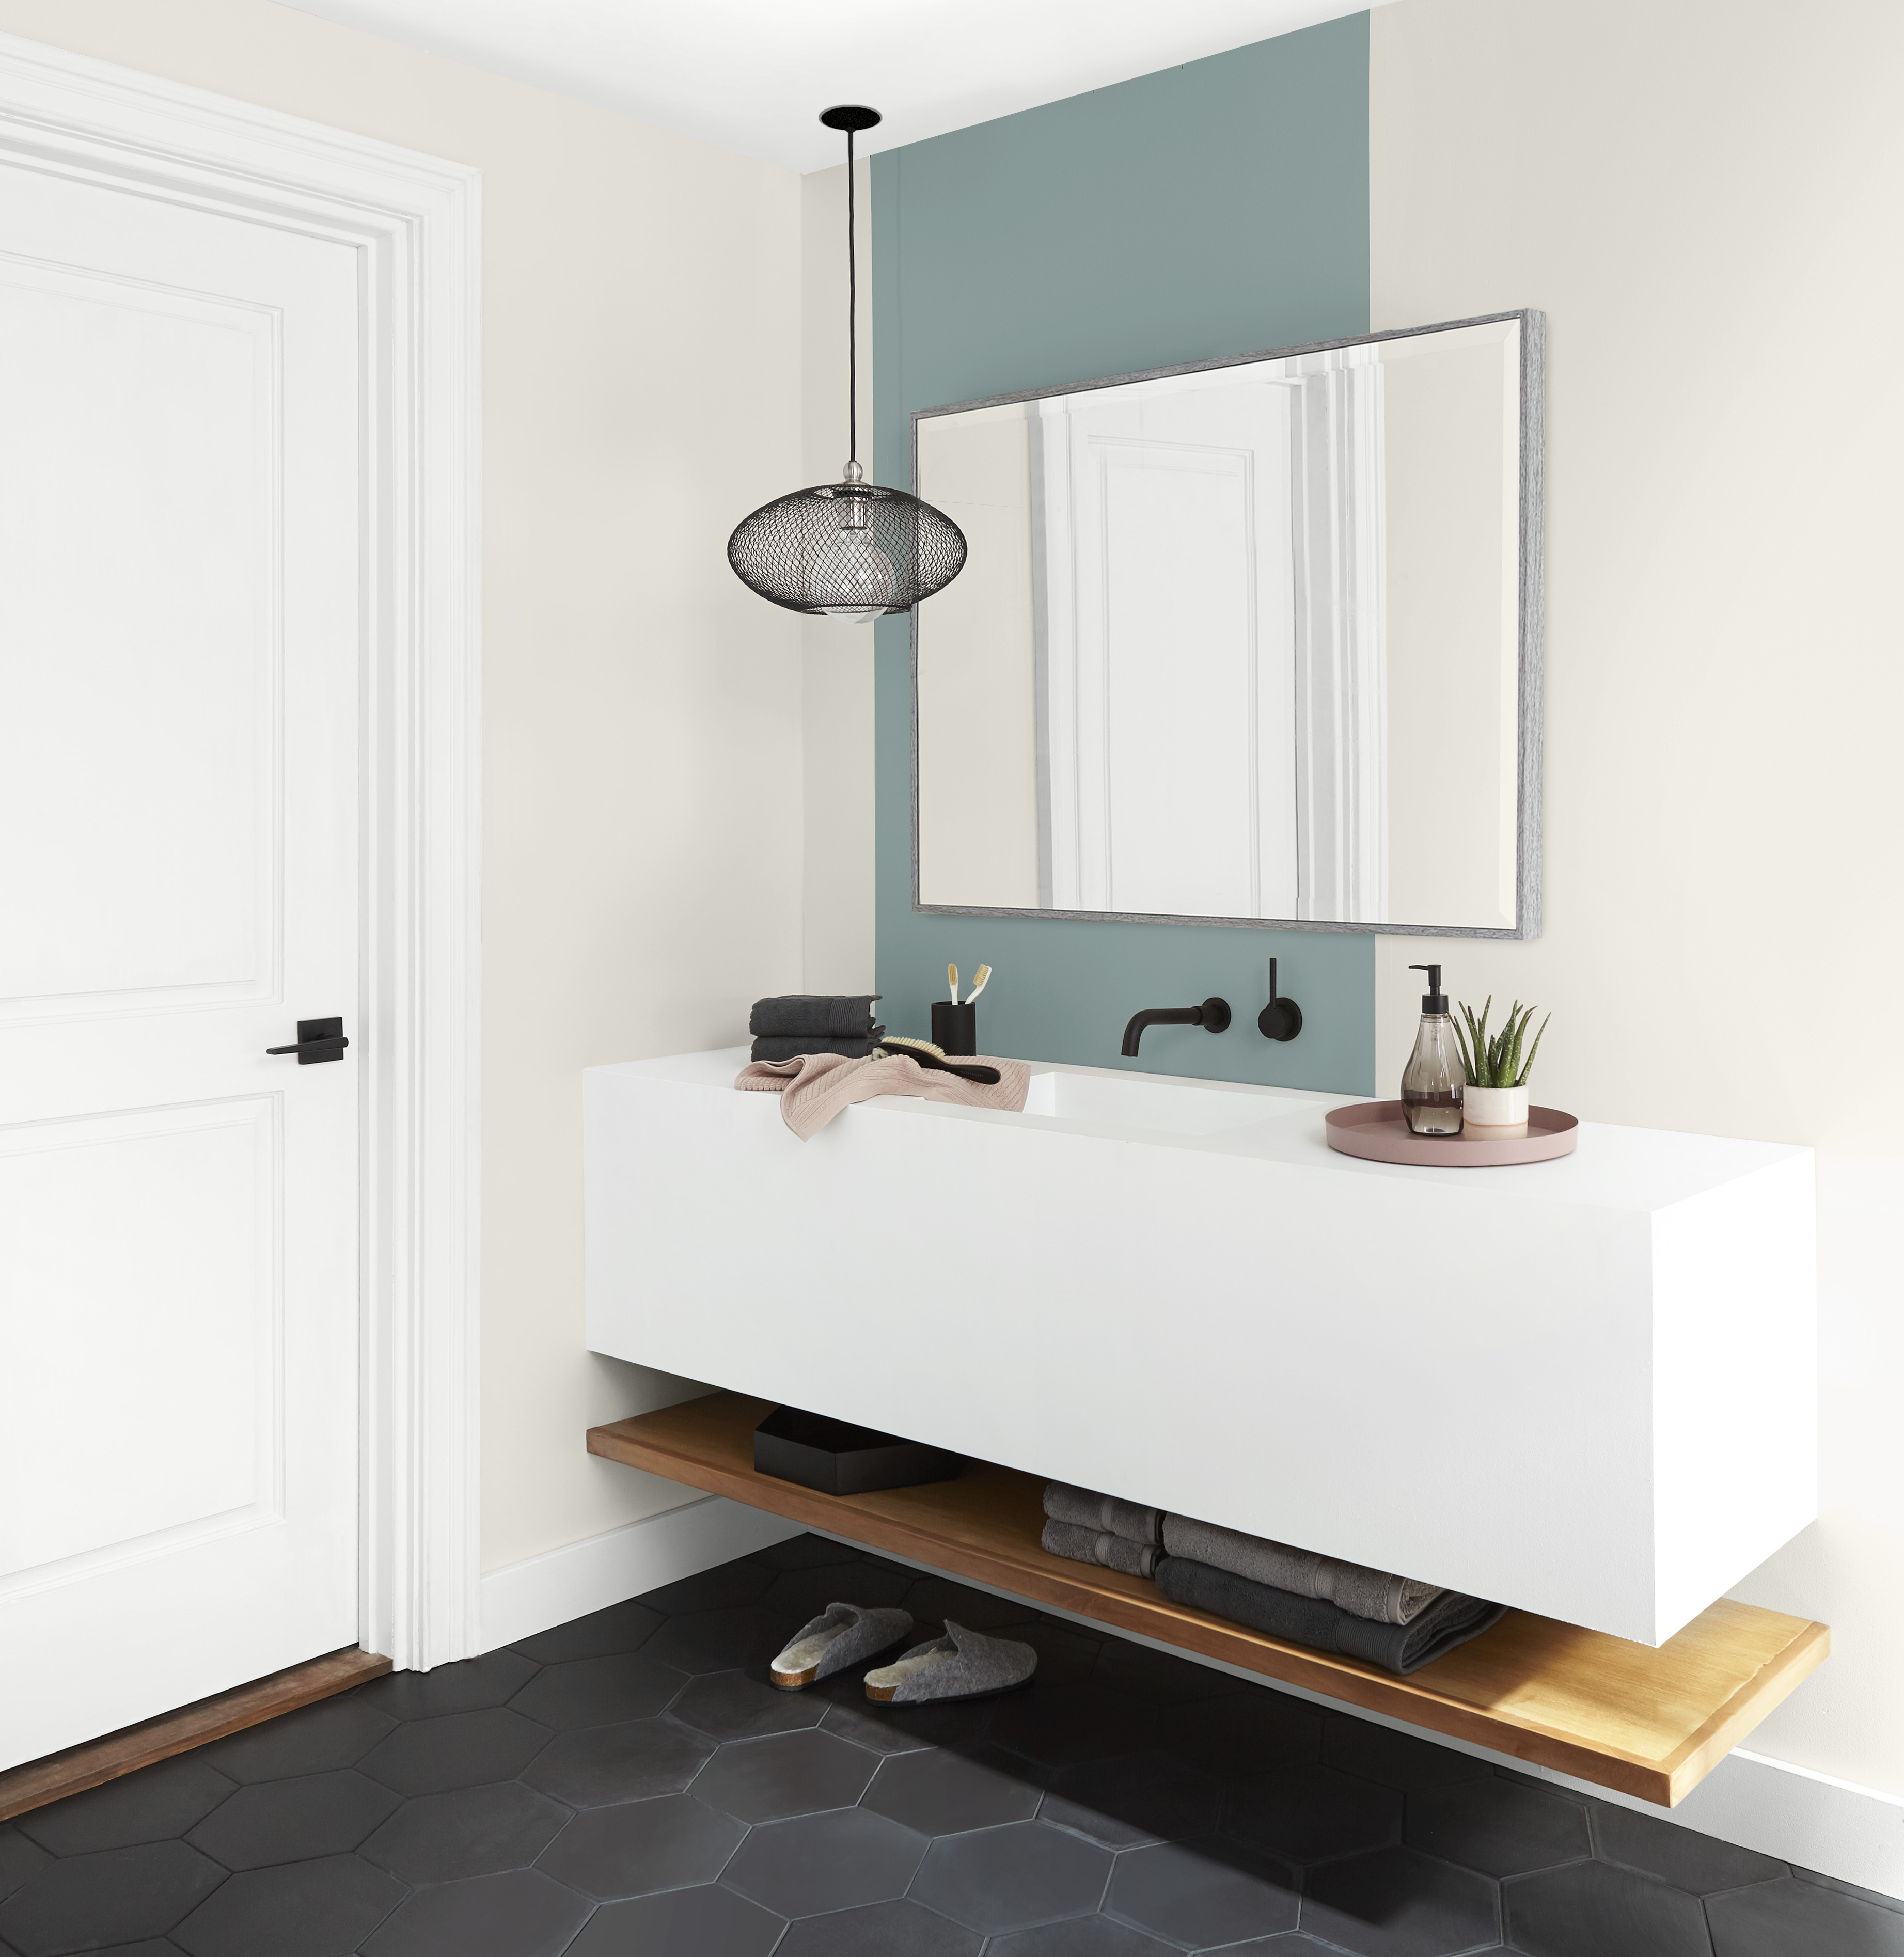 A modern bathroom with a floating sink, with an accent wall painted in a dusty mid-blue-green colour